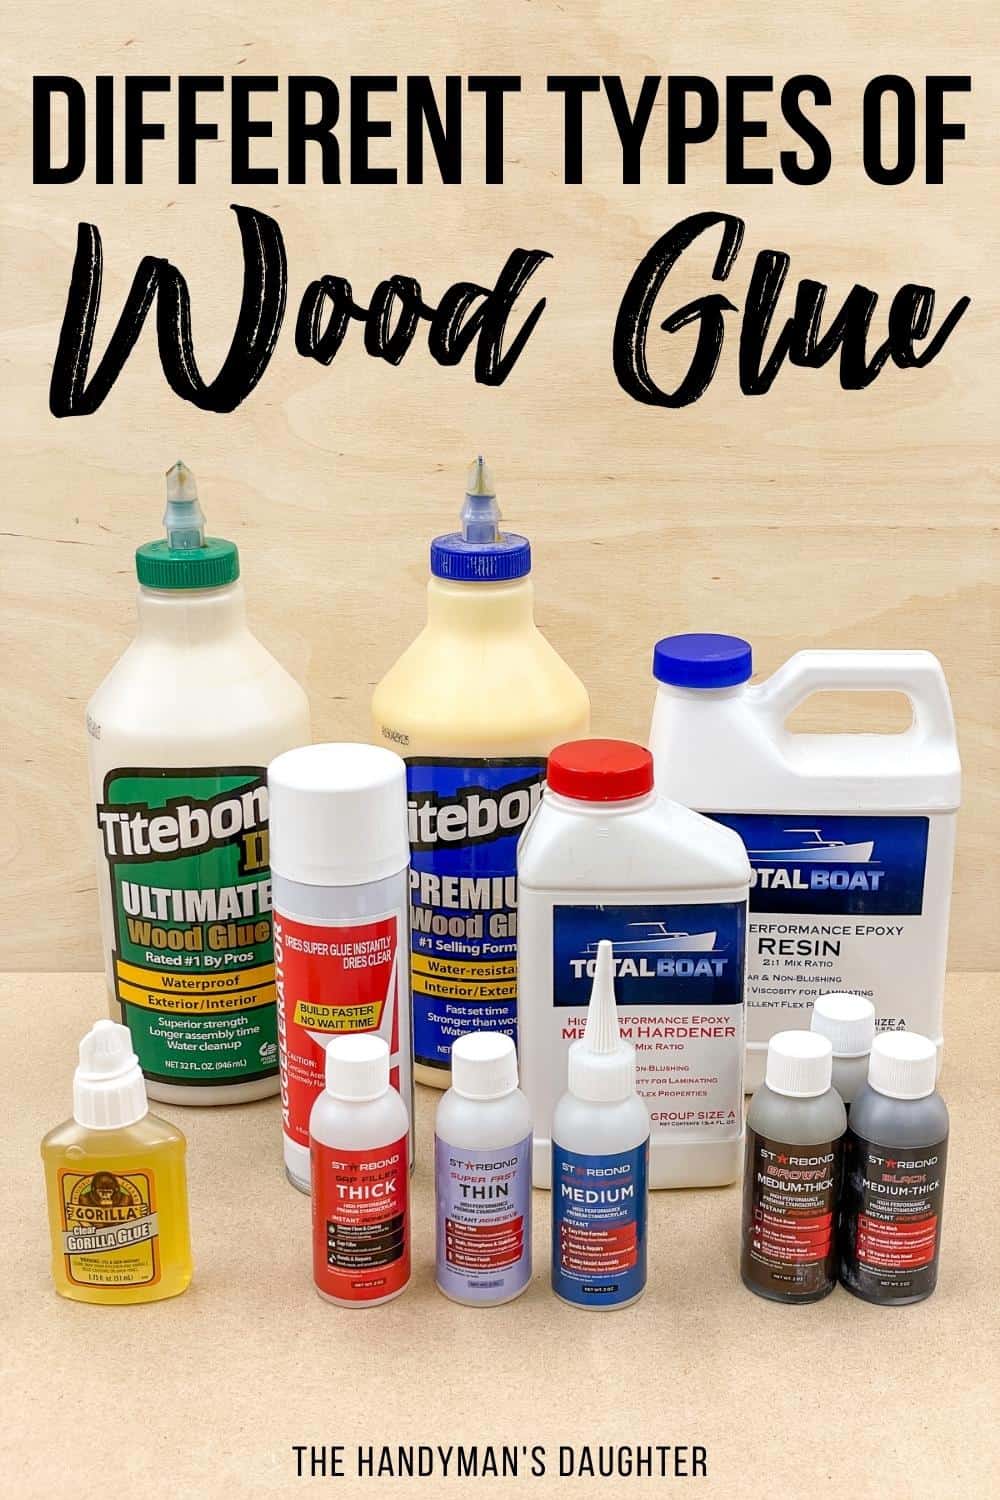 different types of wood glue with text overlay